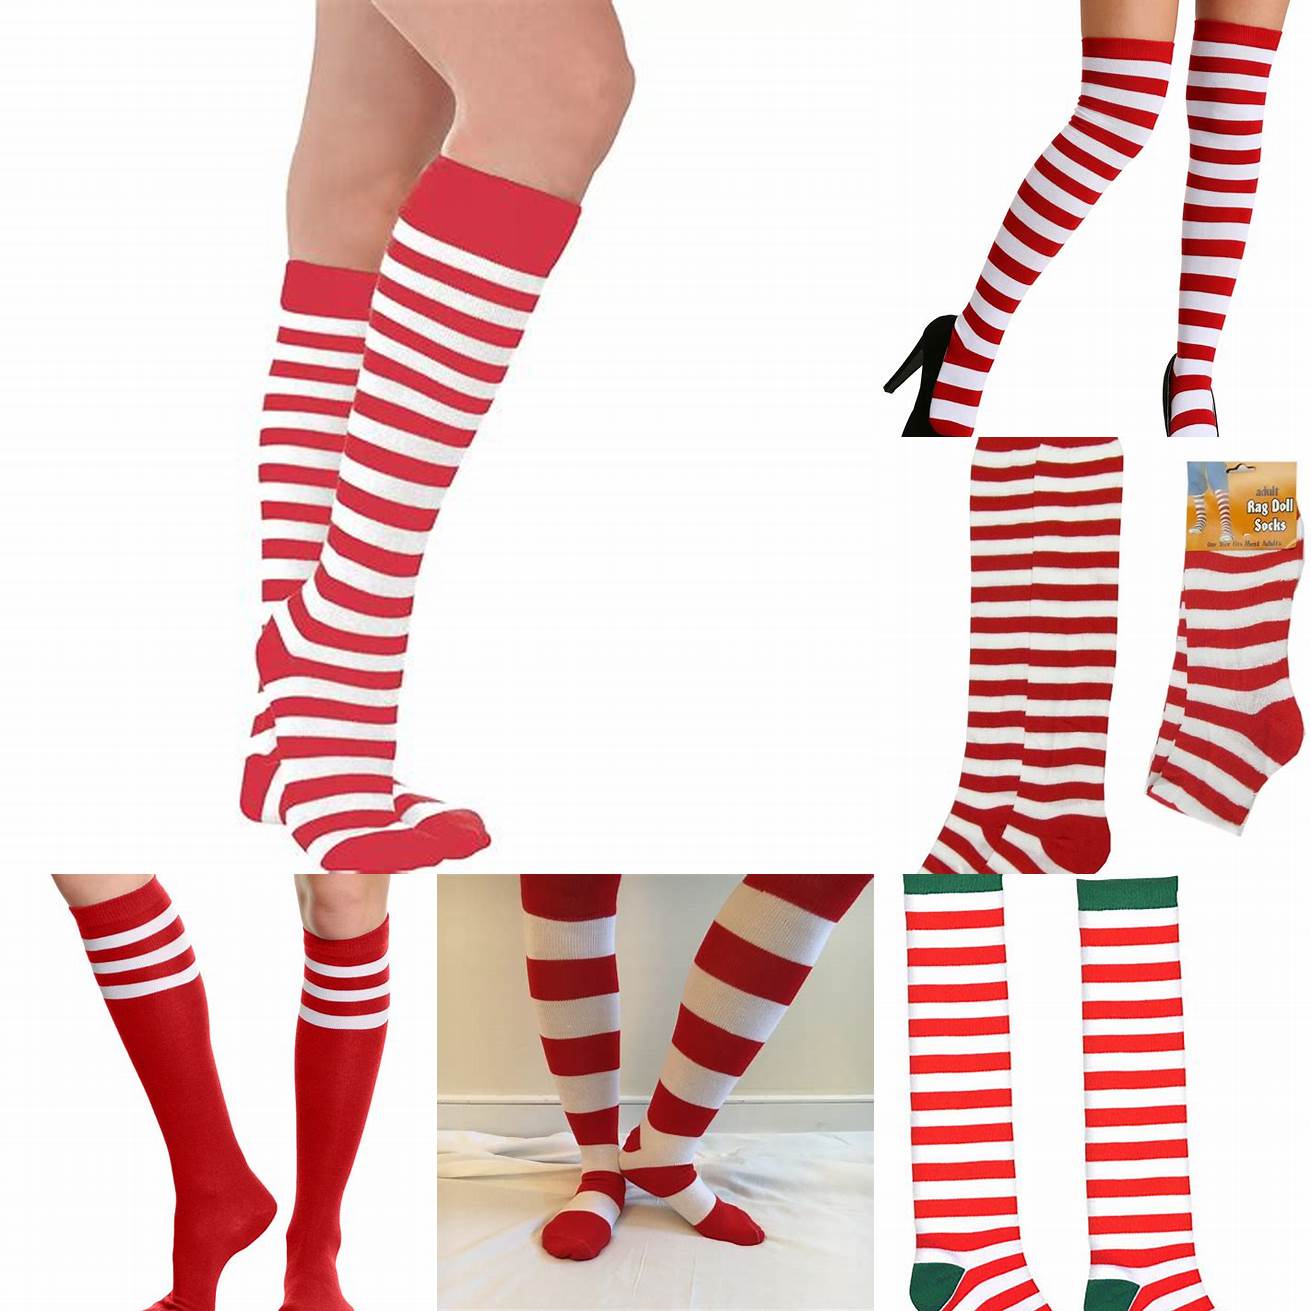 Red and white striped socks and gloves